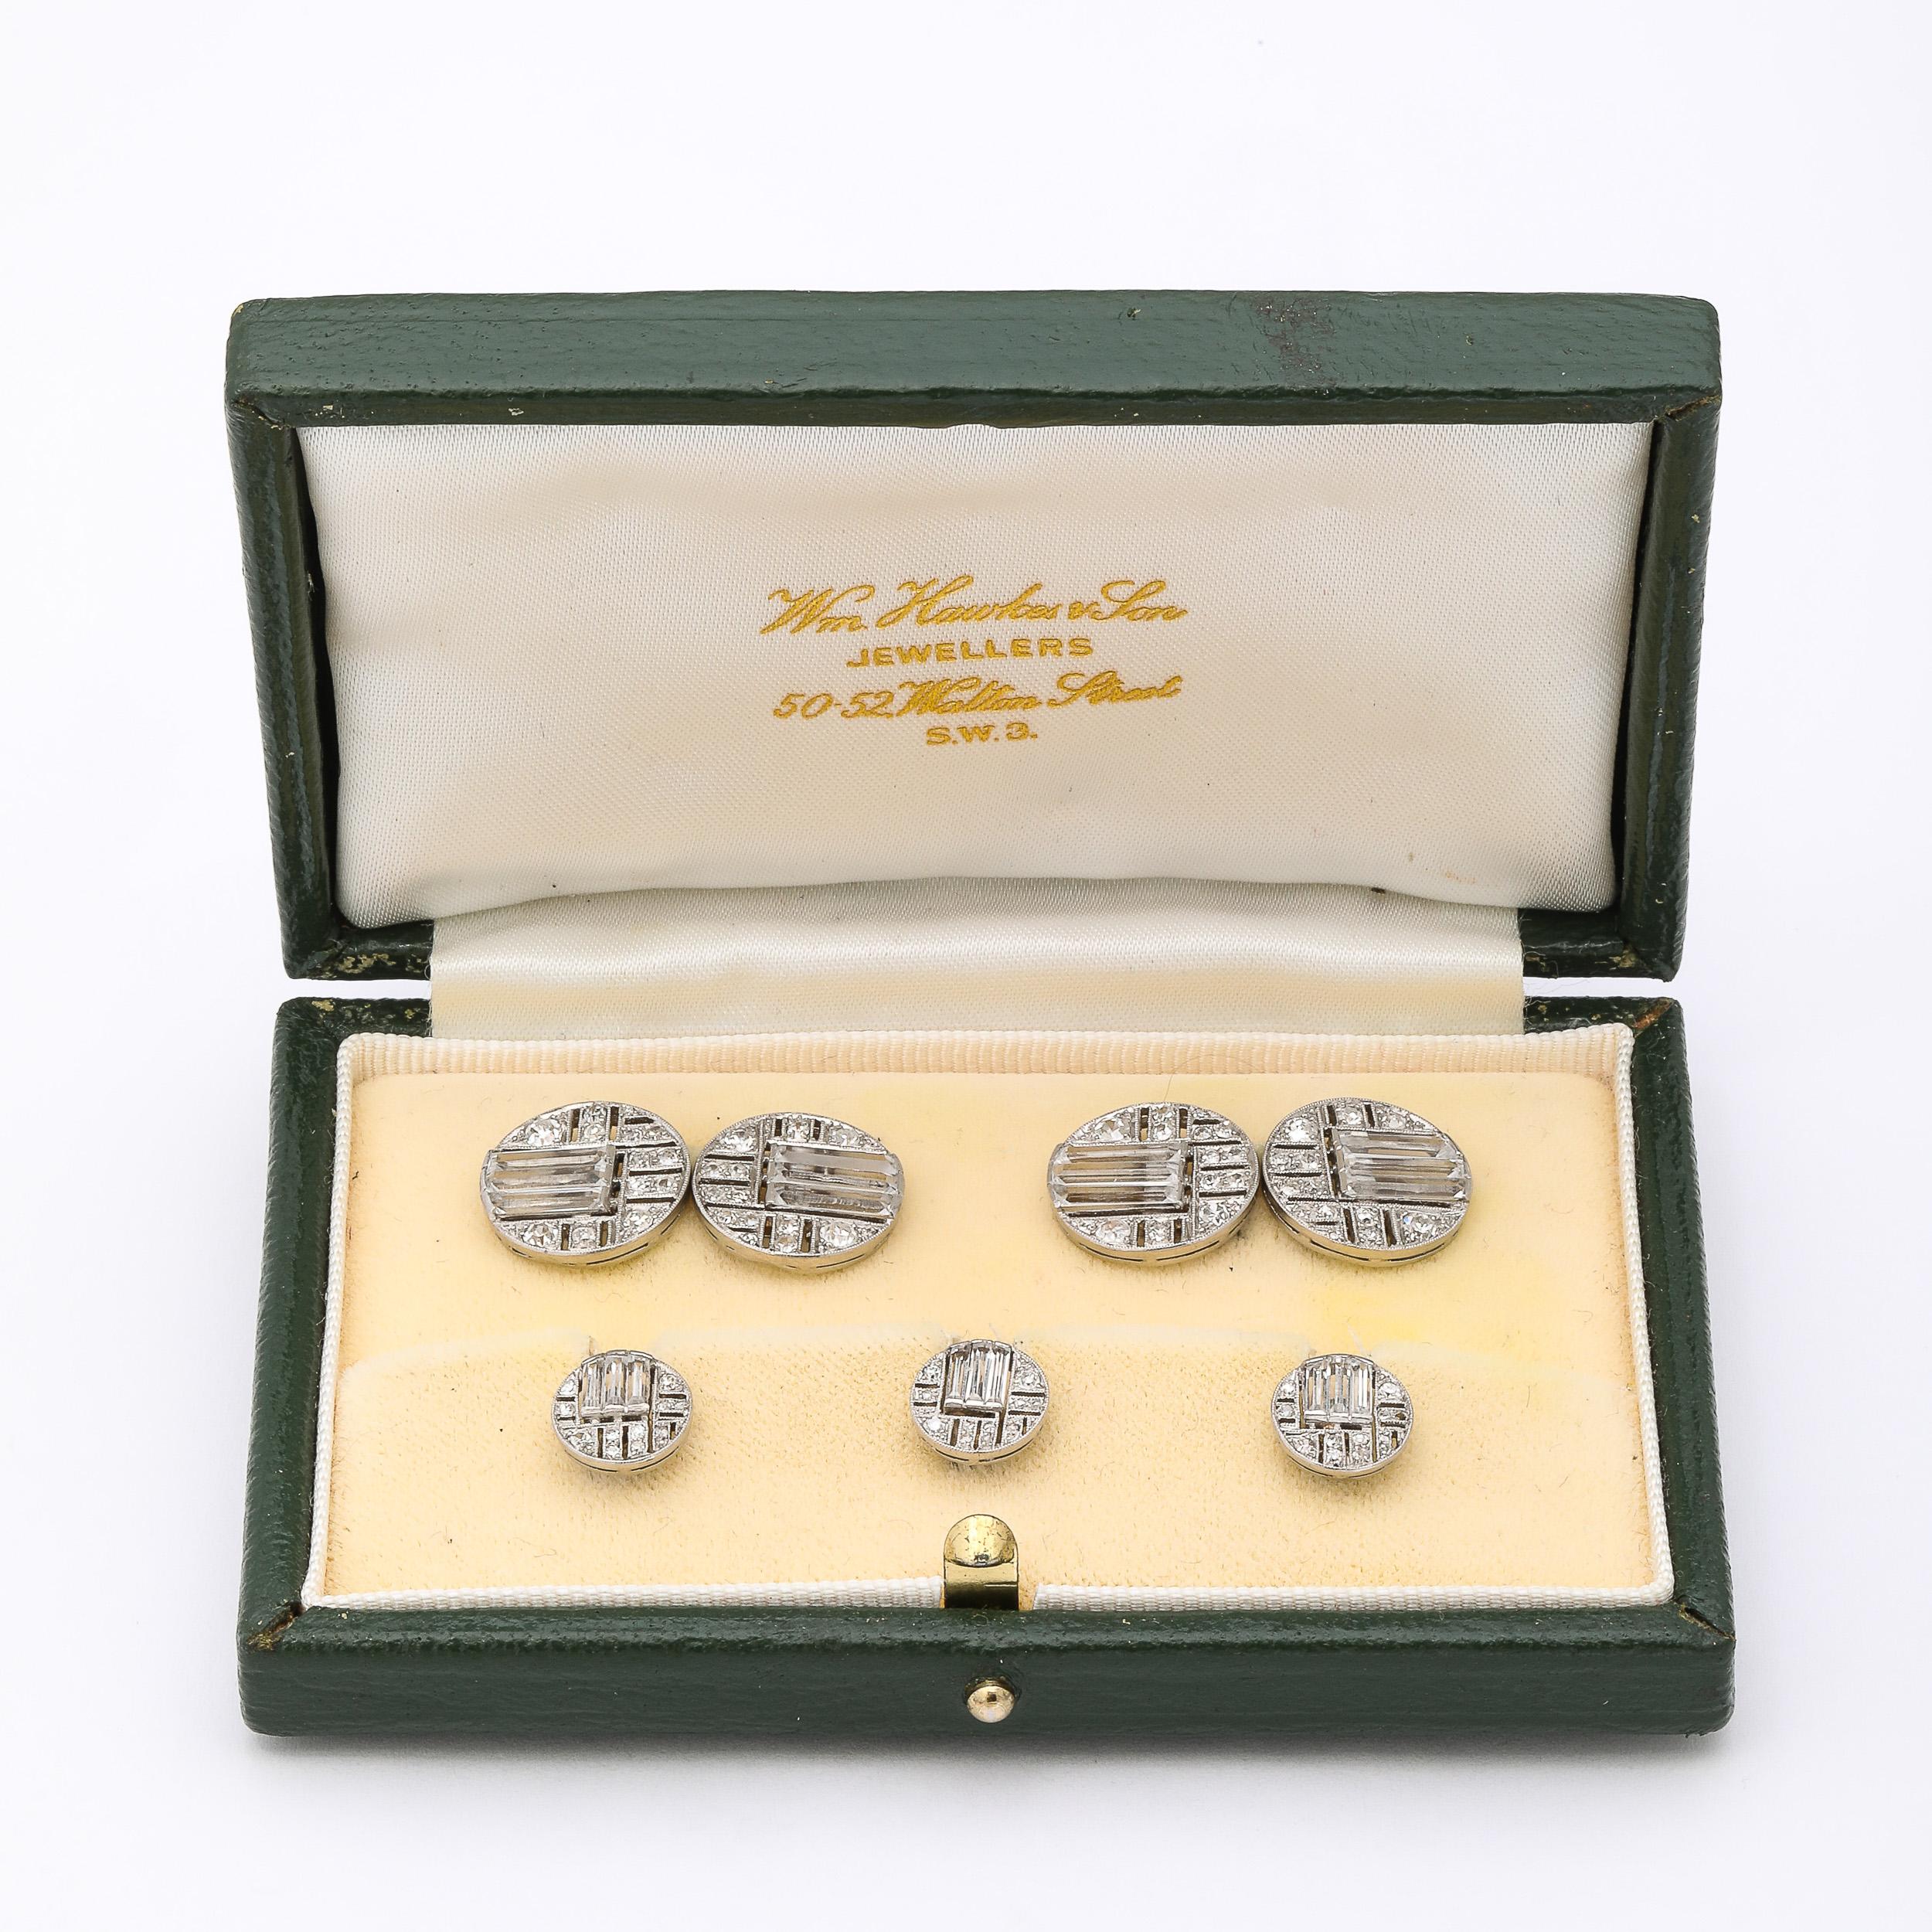 These remarkably crafted and precise Art Deco French Platinum Diamond Cufflinks and Stud Set originate from France, Circa 1930. A timeless expression of the opulence, attention to detail, and rigorously balanced and artfully achieved geometry